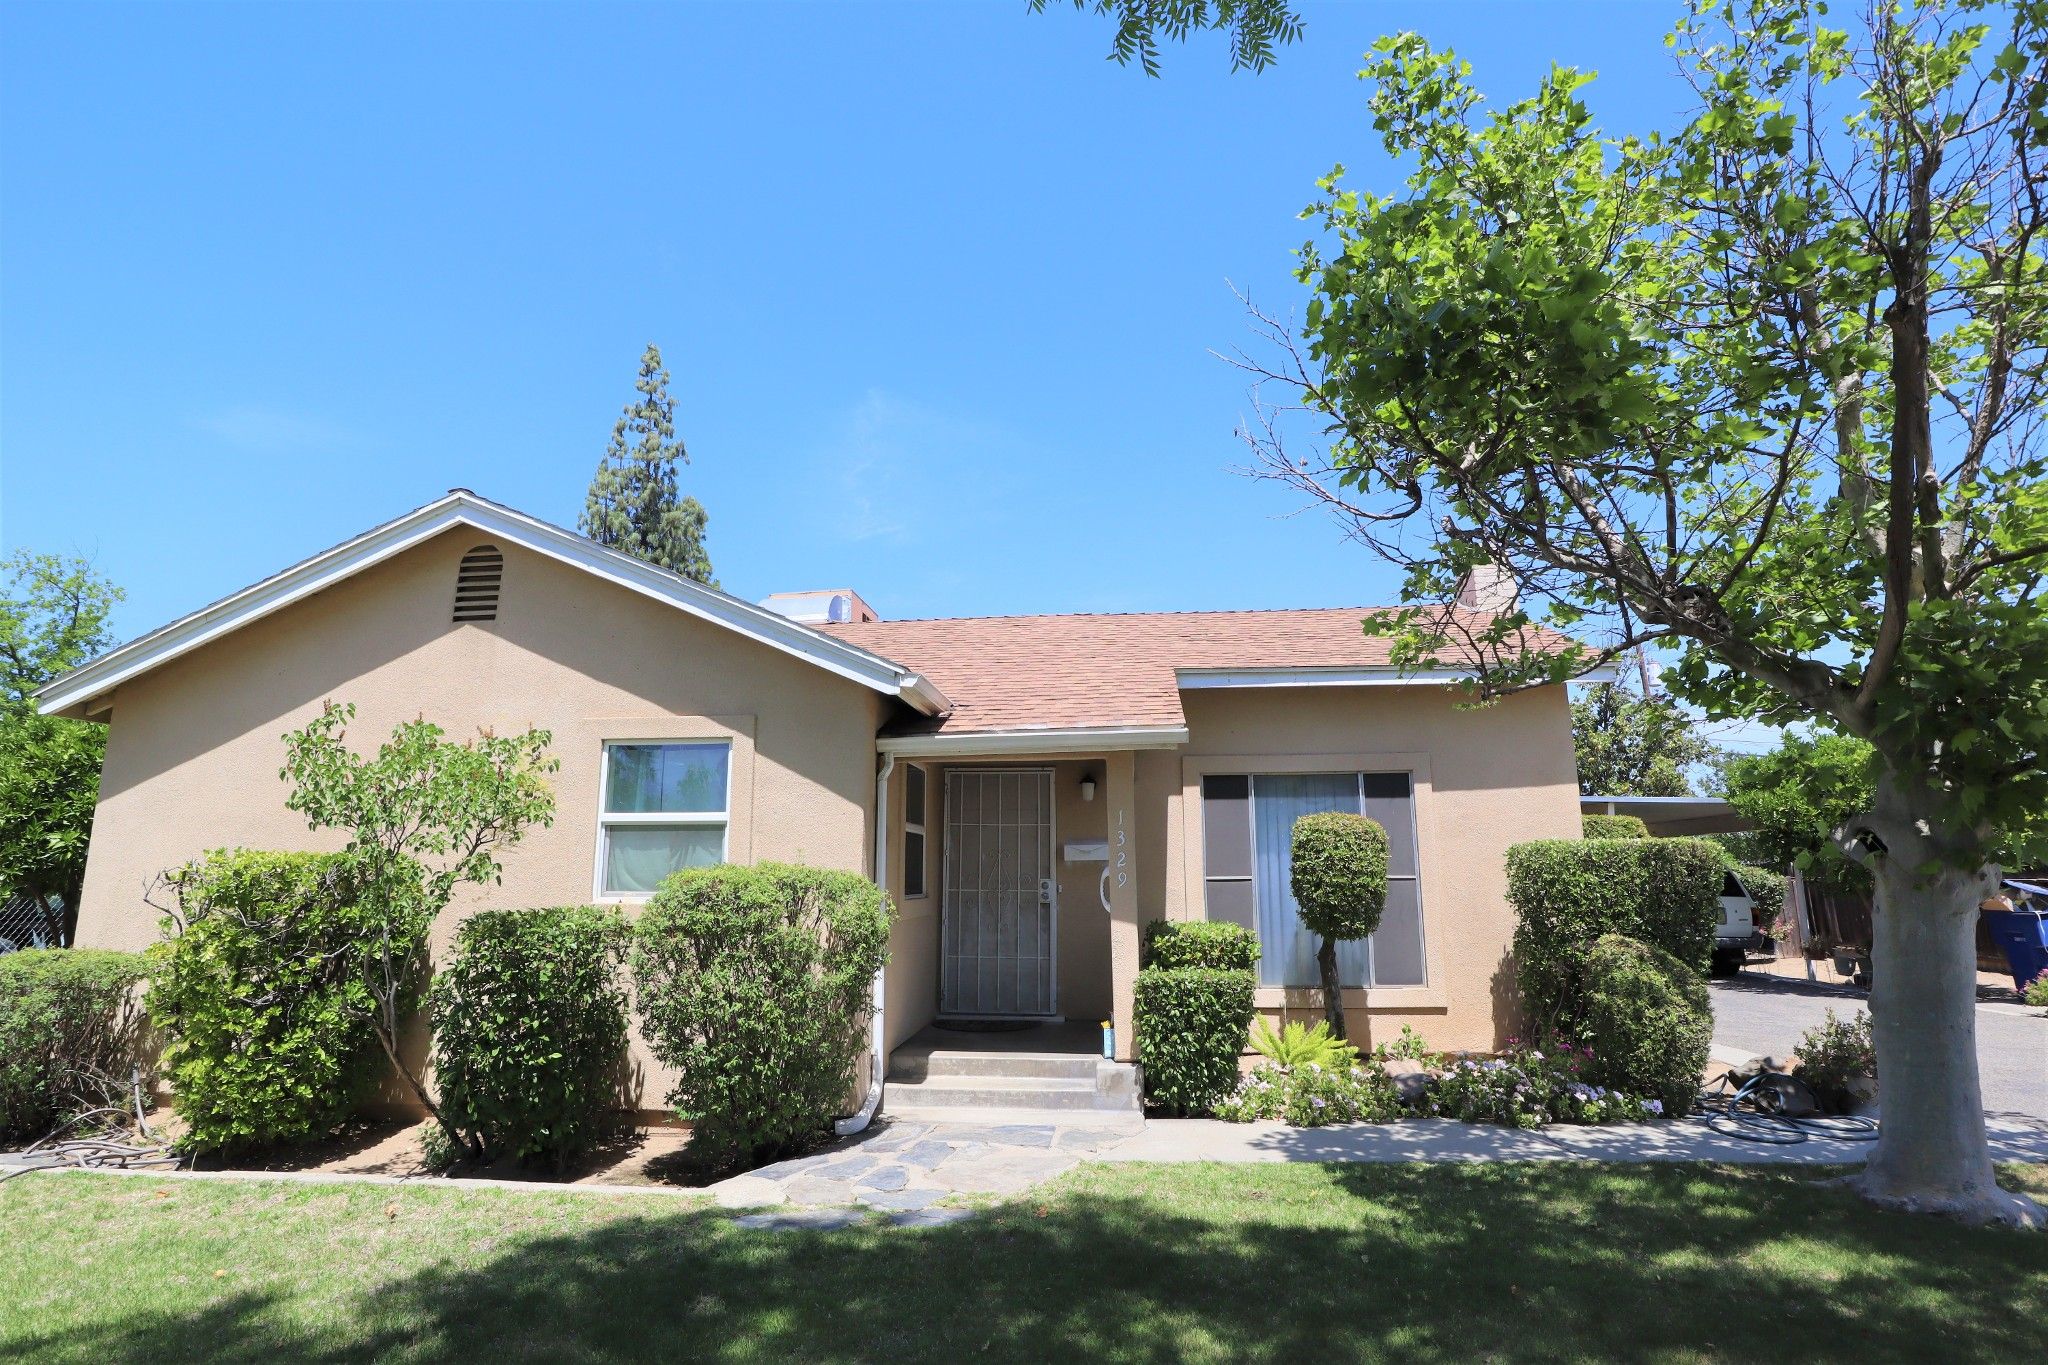 Main Photo: 1329 East Fedora Avenue in Fresno: Residential for sale : MLS®# 559945